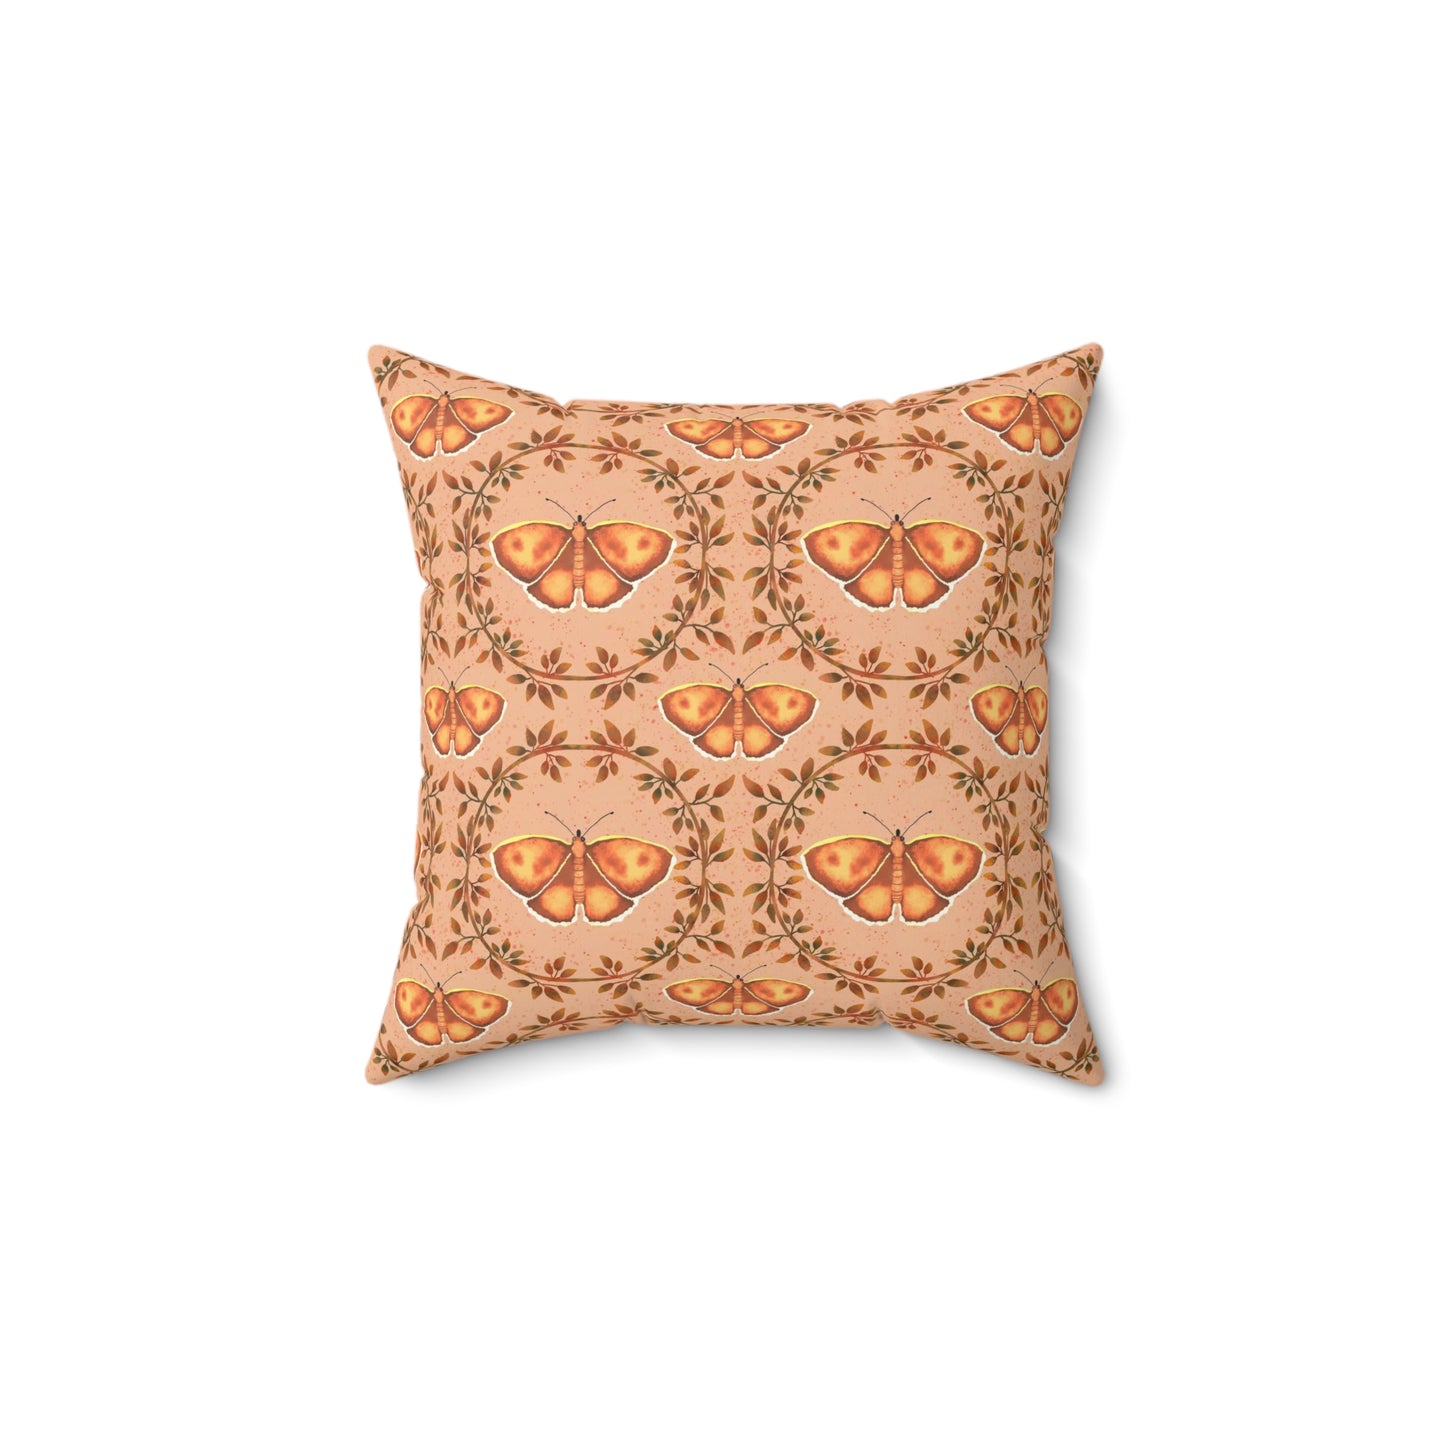 Moths and Vines Spun Polyester Square Pillow